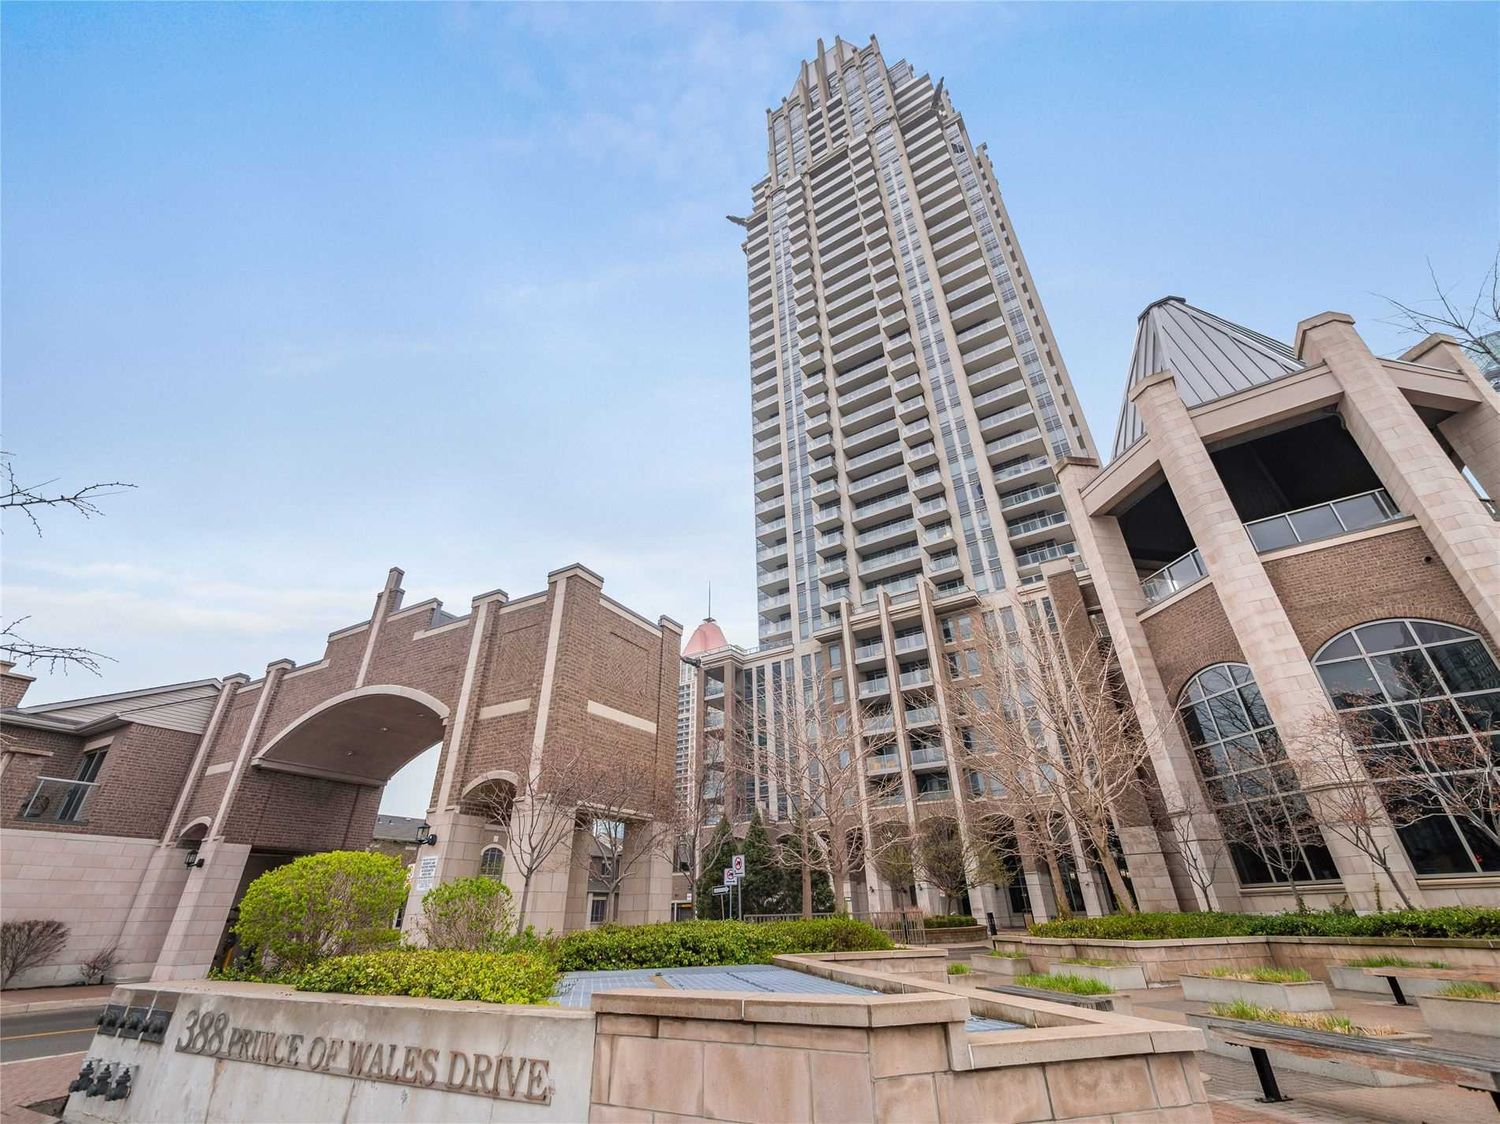 388 Prince of Wales Dr. This condo at One Park Tower Condos is located in  Mississauga, Toronto - image #2 of 2 by Strata.ca